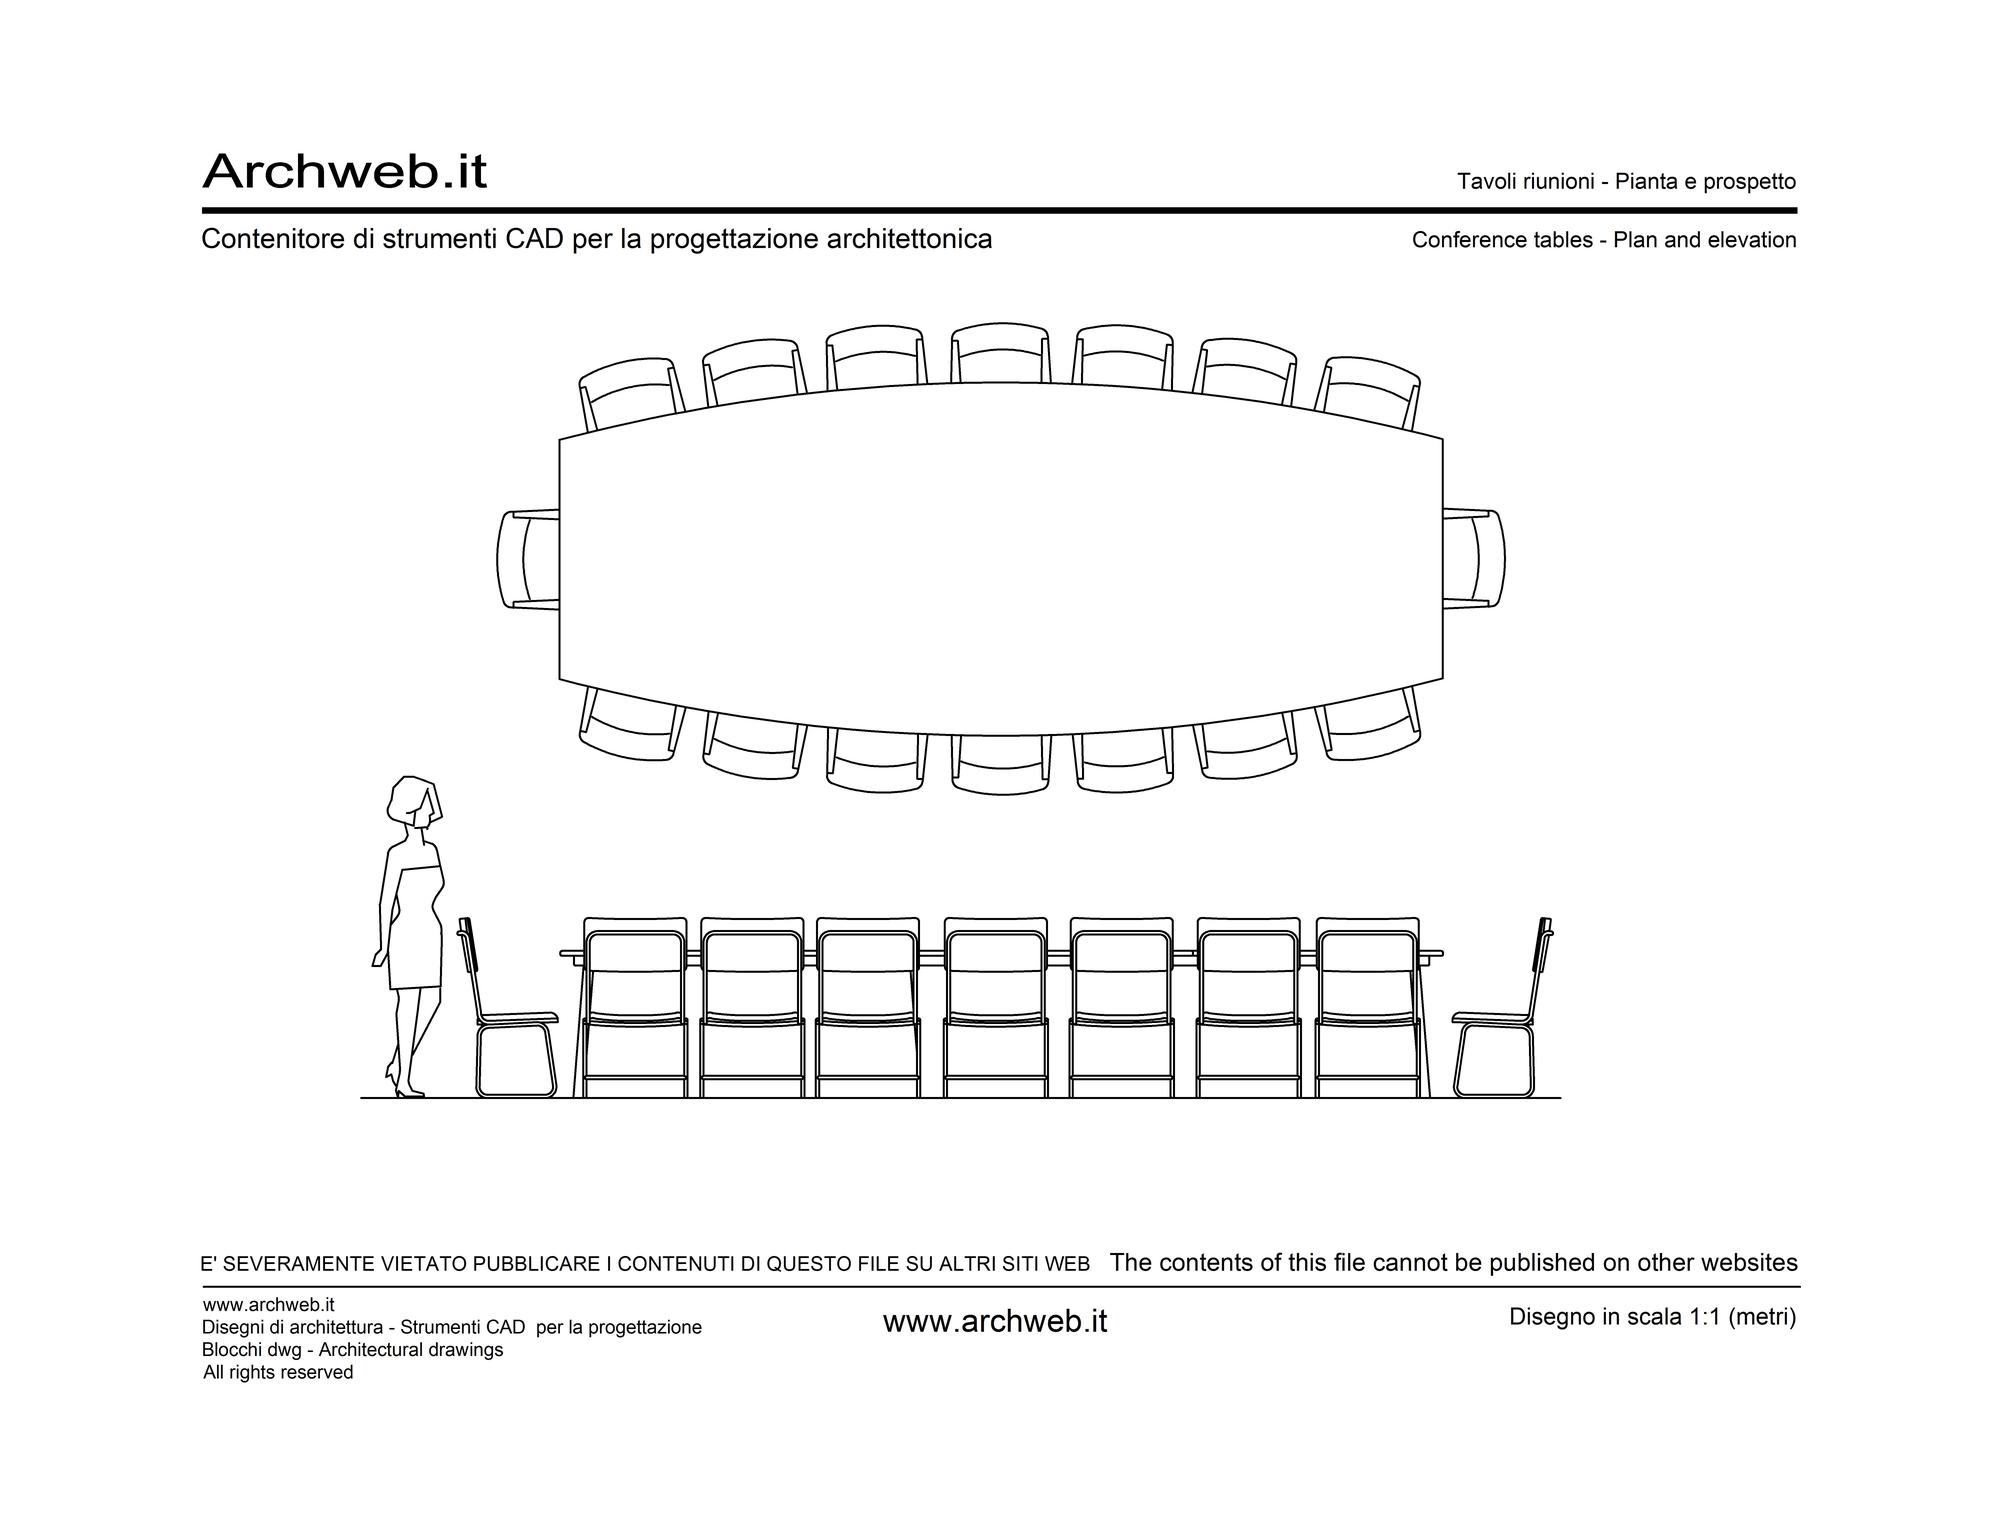 Meeting table 01: plan and elevation dwg Archweb